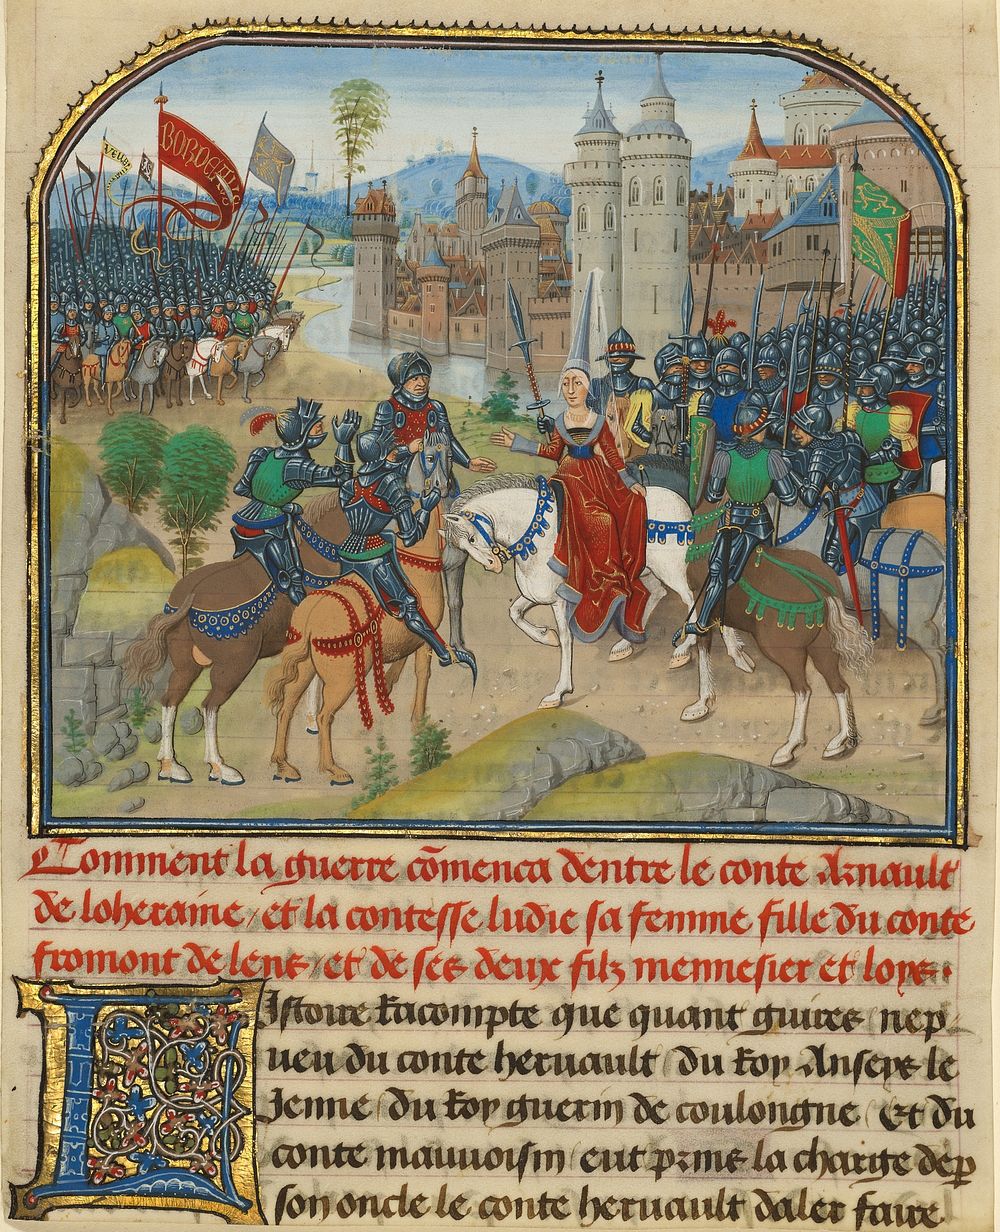 The Battle Between Arnault de Lorraine and His Wife Lydia by Loyset Liédet and Pol Fruit